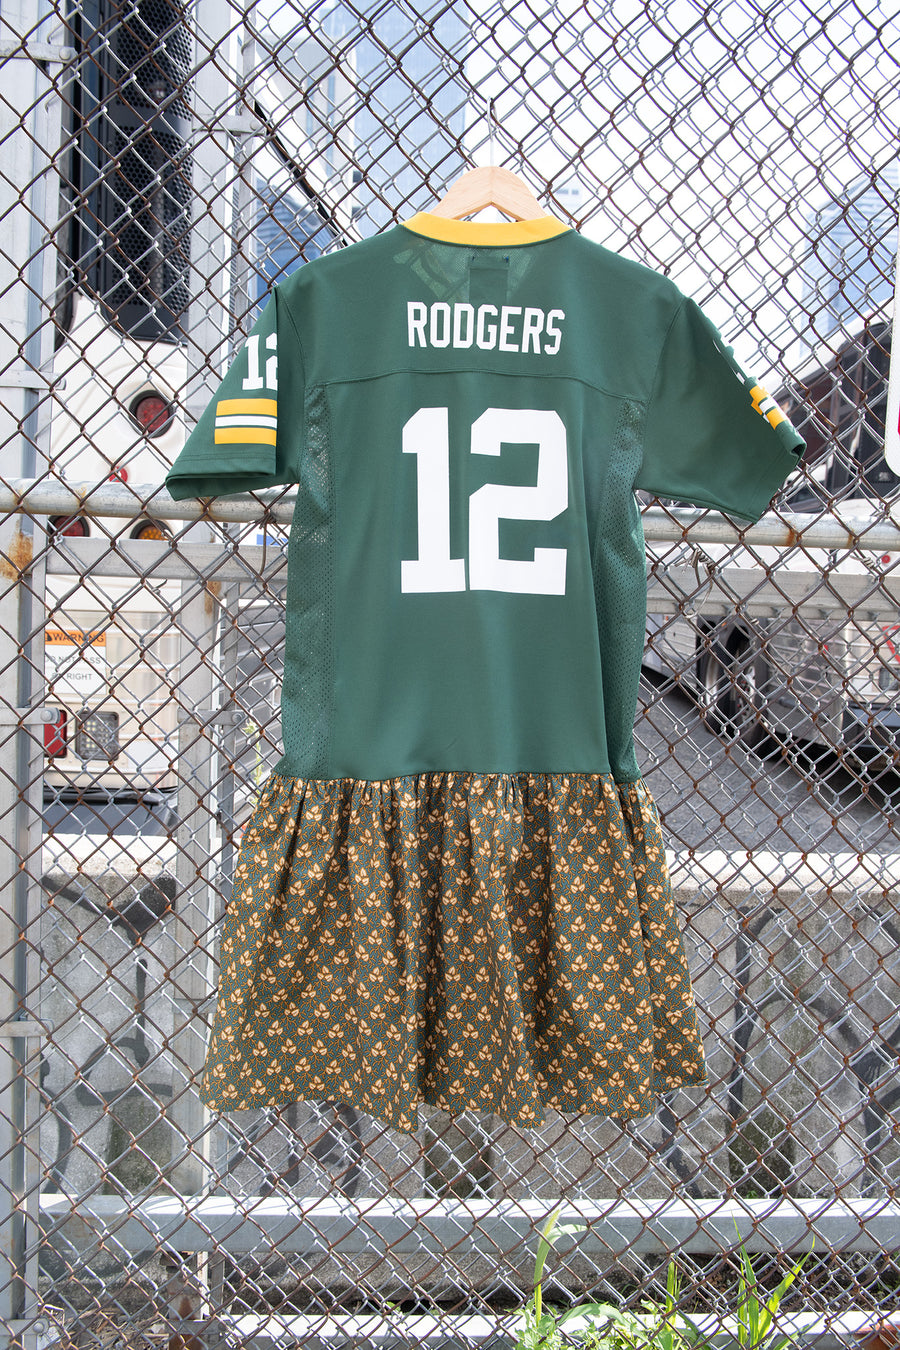 One-of-a-Kind Vintage Green Bay Packers Jersey Dress